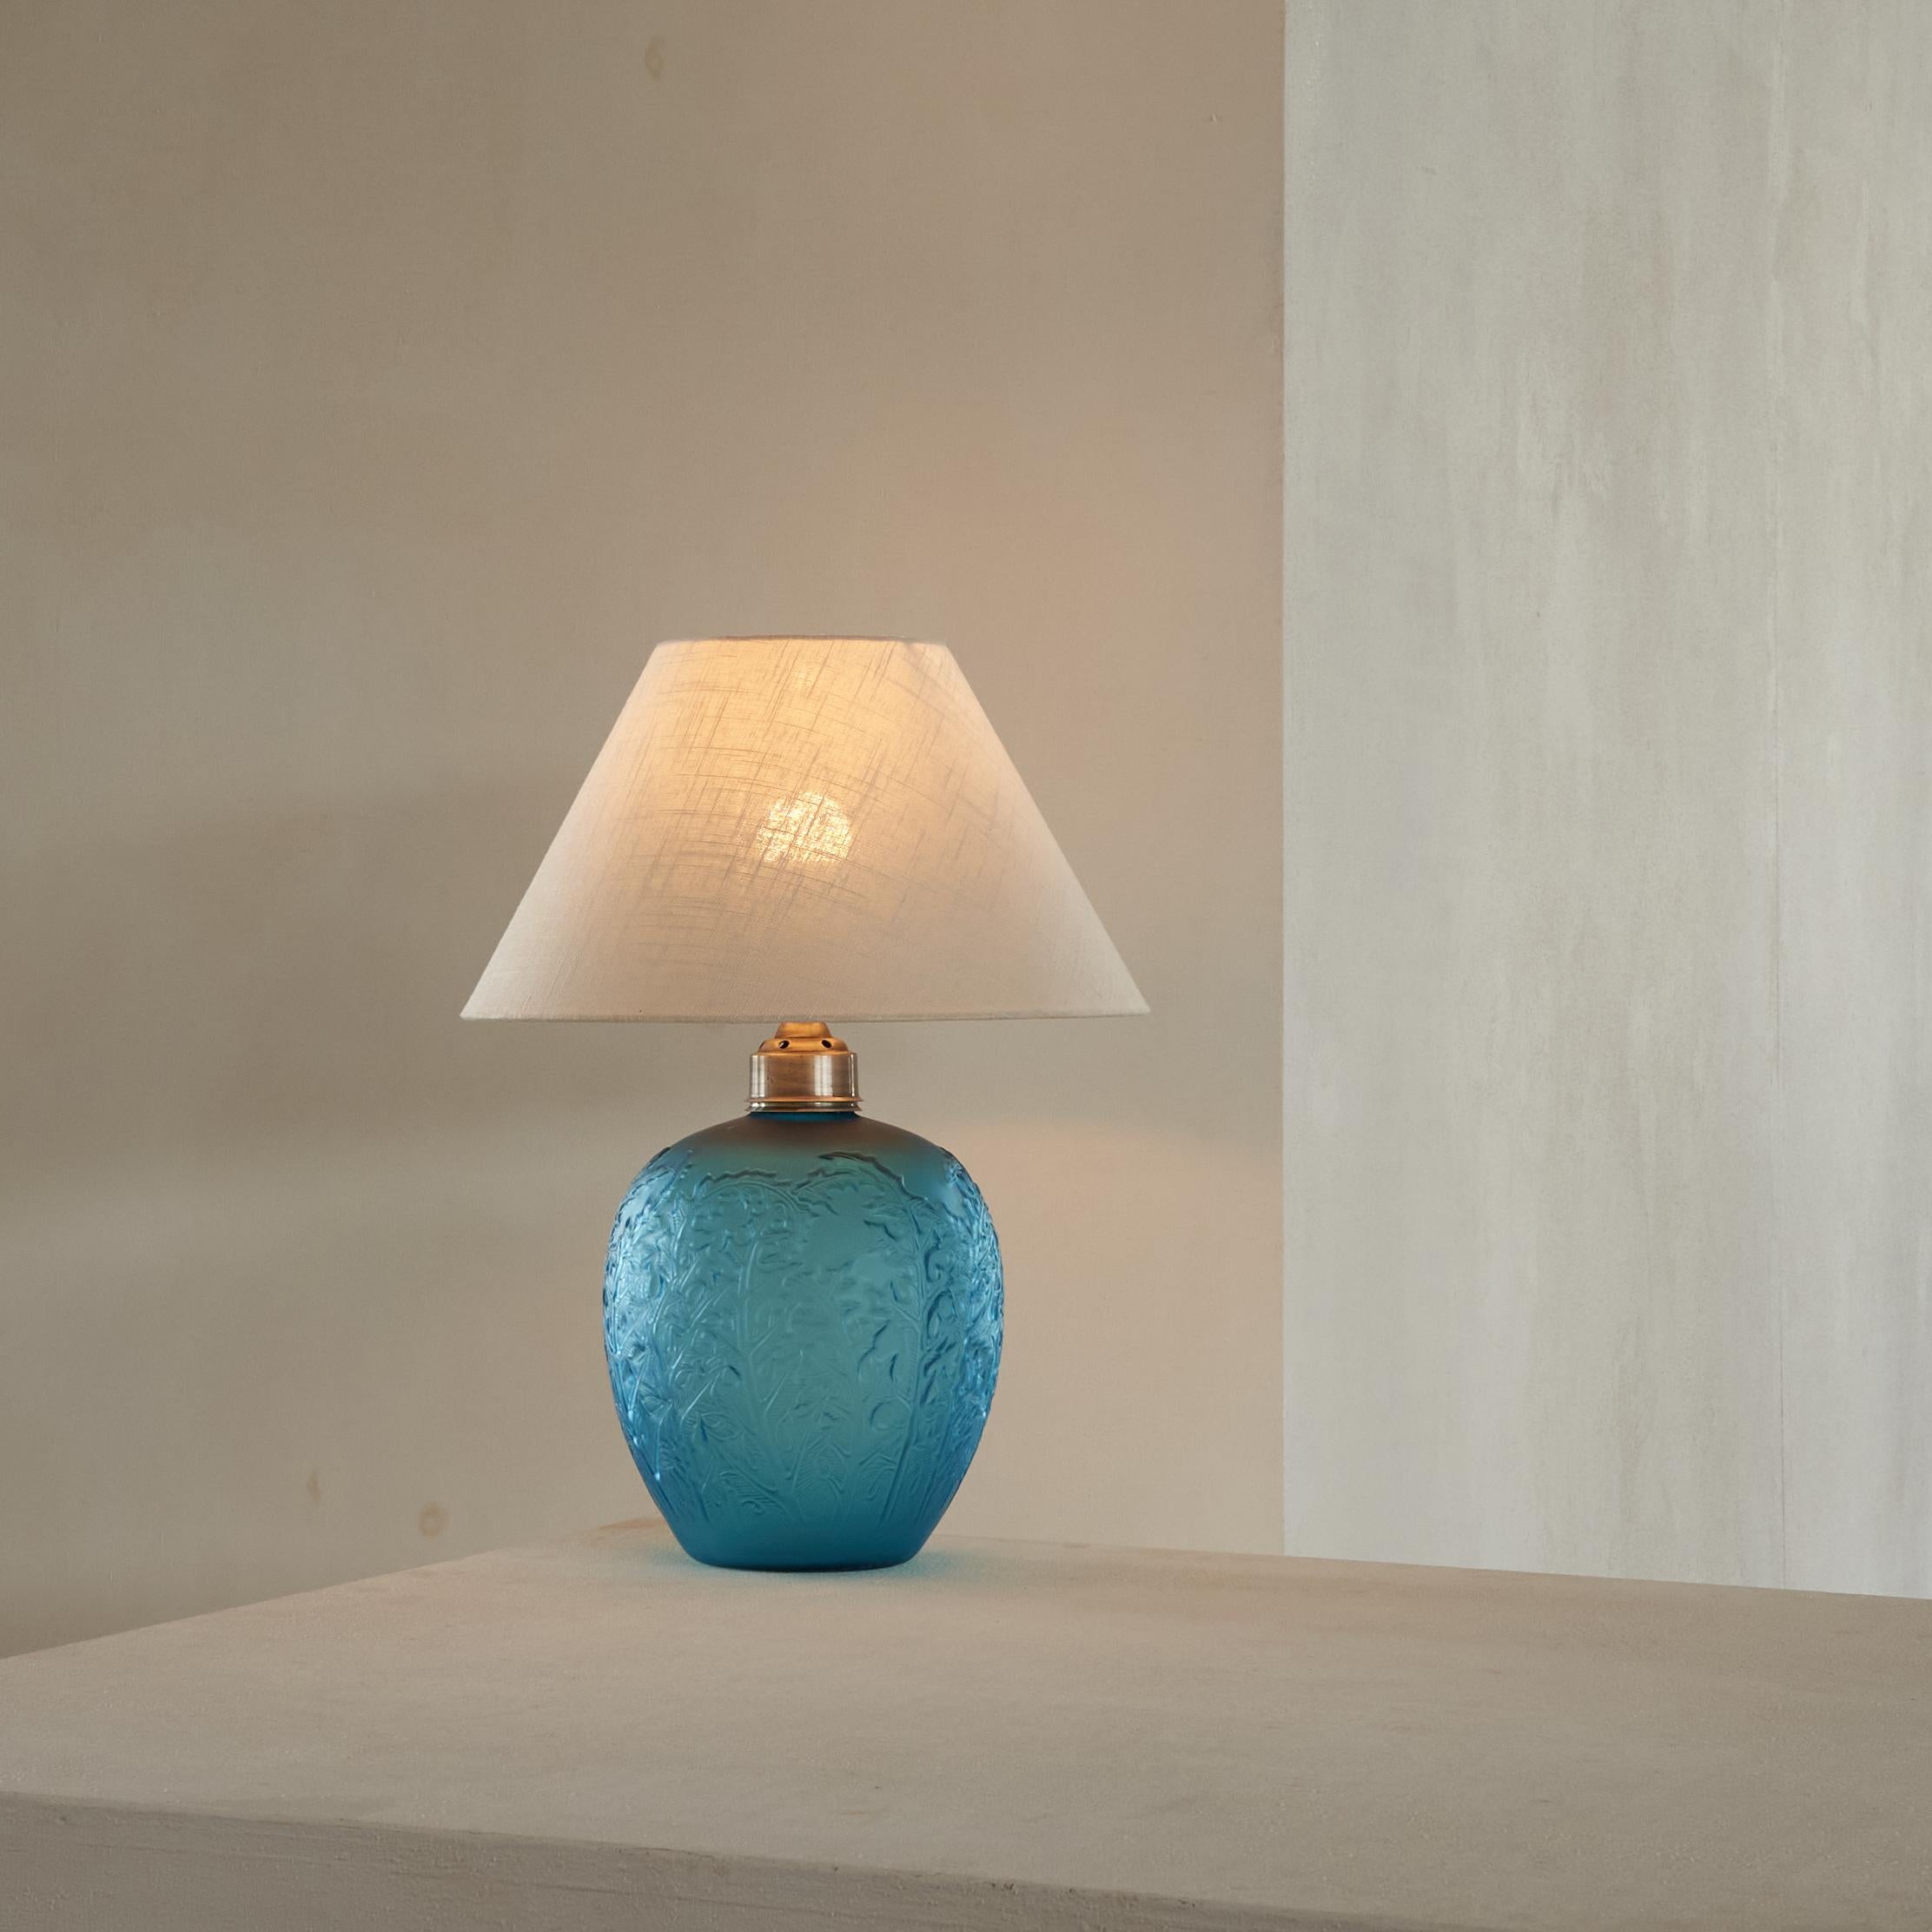 Acanthes' Table Lamp after René Lalique by Consolidated Glass Company 1930s

Straight from the first owner in Ghent Belgium, comes this wonderful and rare table lamp in radiant blue art glass - made to a design after René Lalique. It comes from a